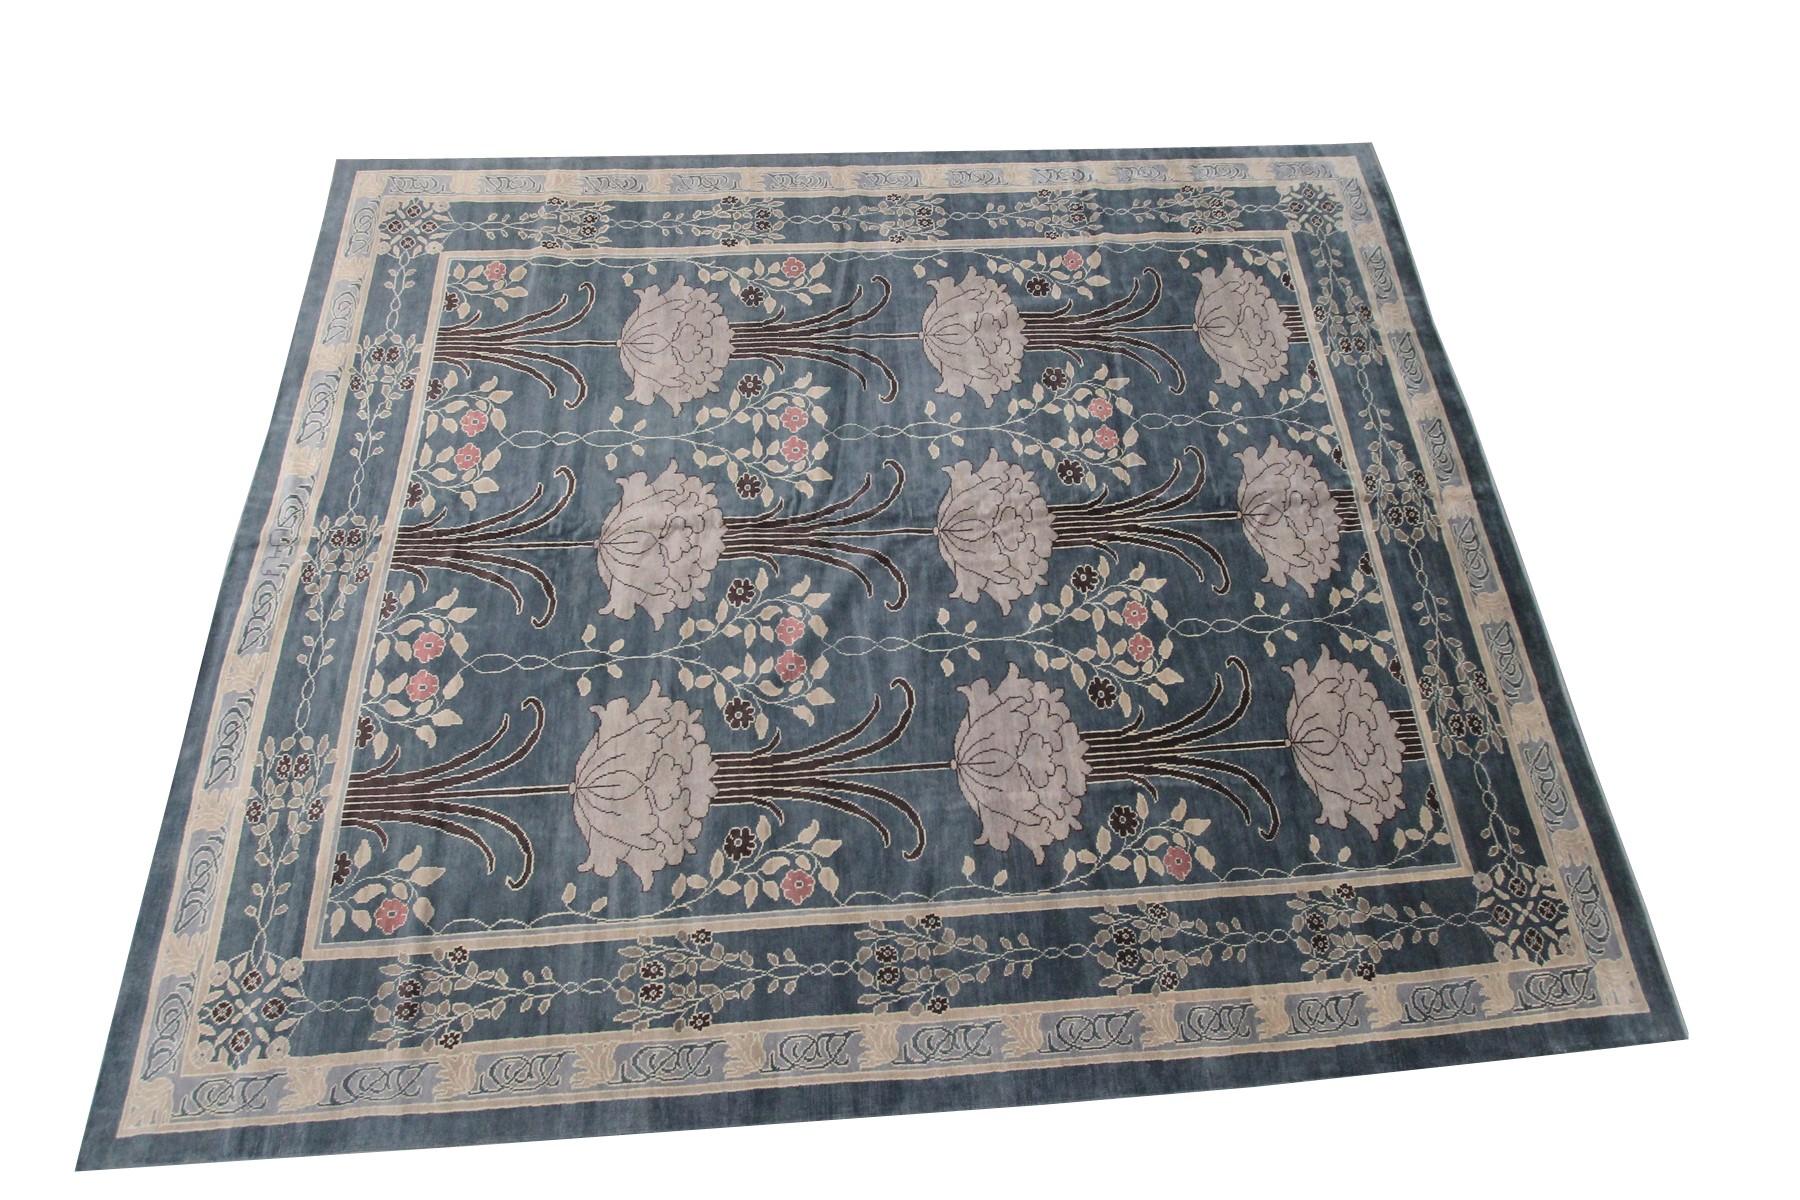 Vintage Arts & Crafts Rug Art Nouveau Rug William Morris Art Deco Rug 12x15 In Good Condition For Sale In New York, NY